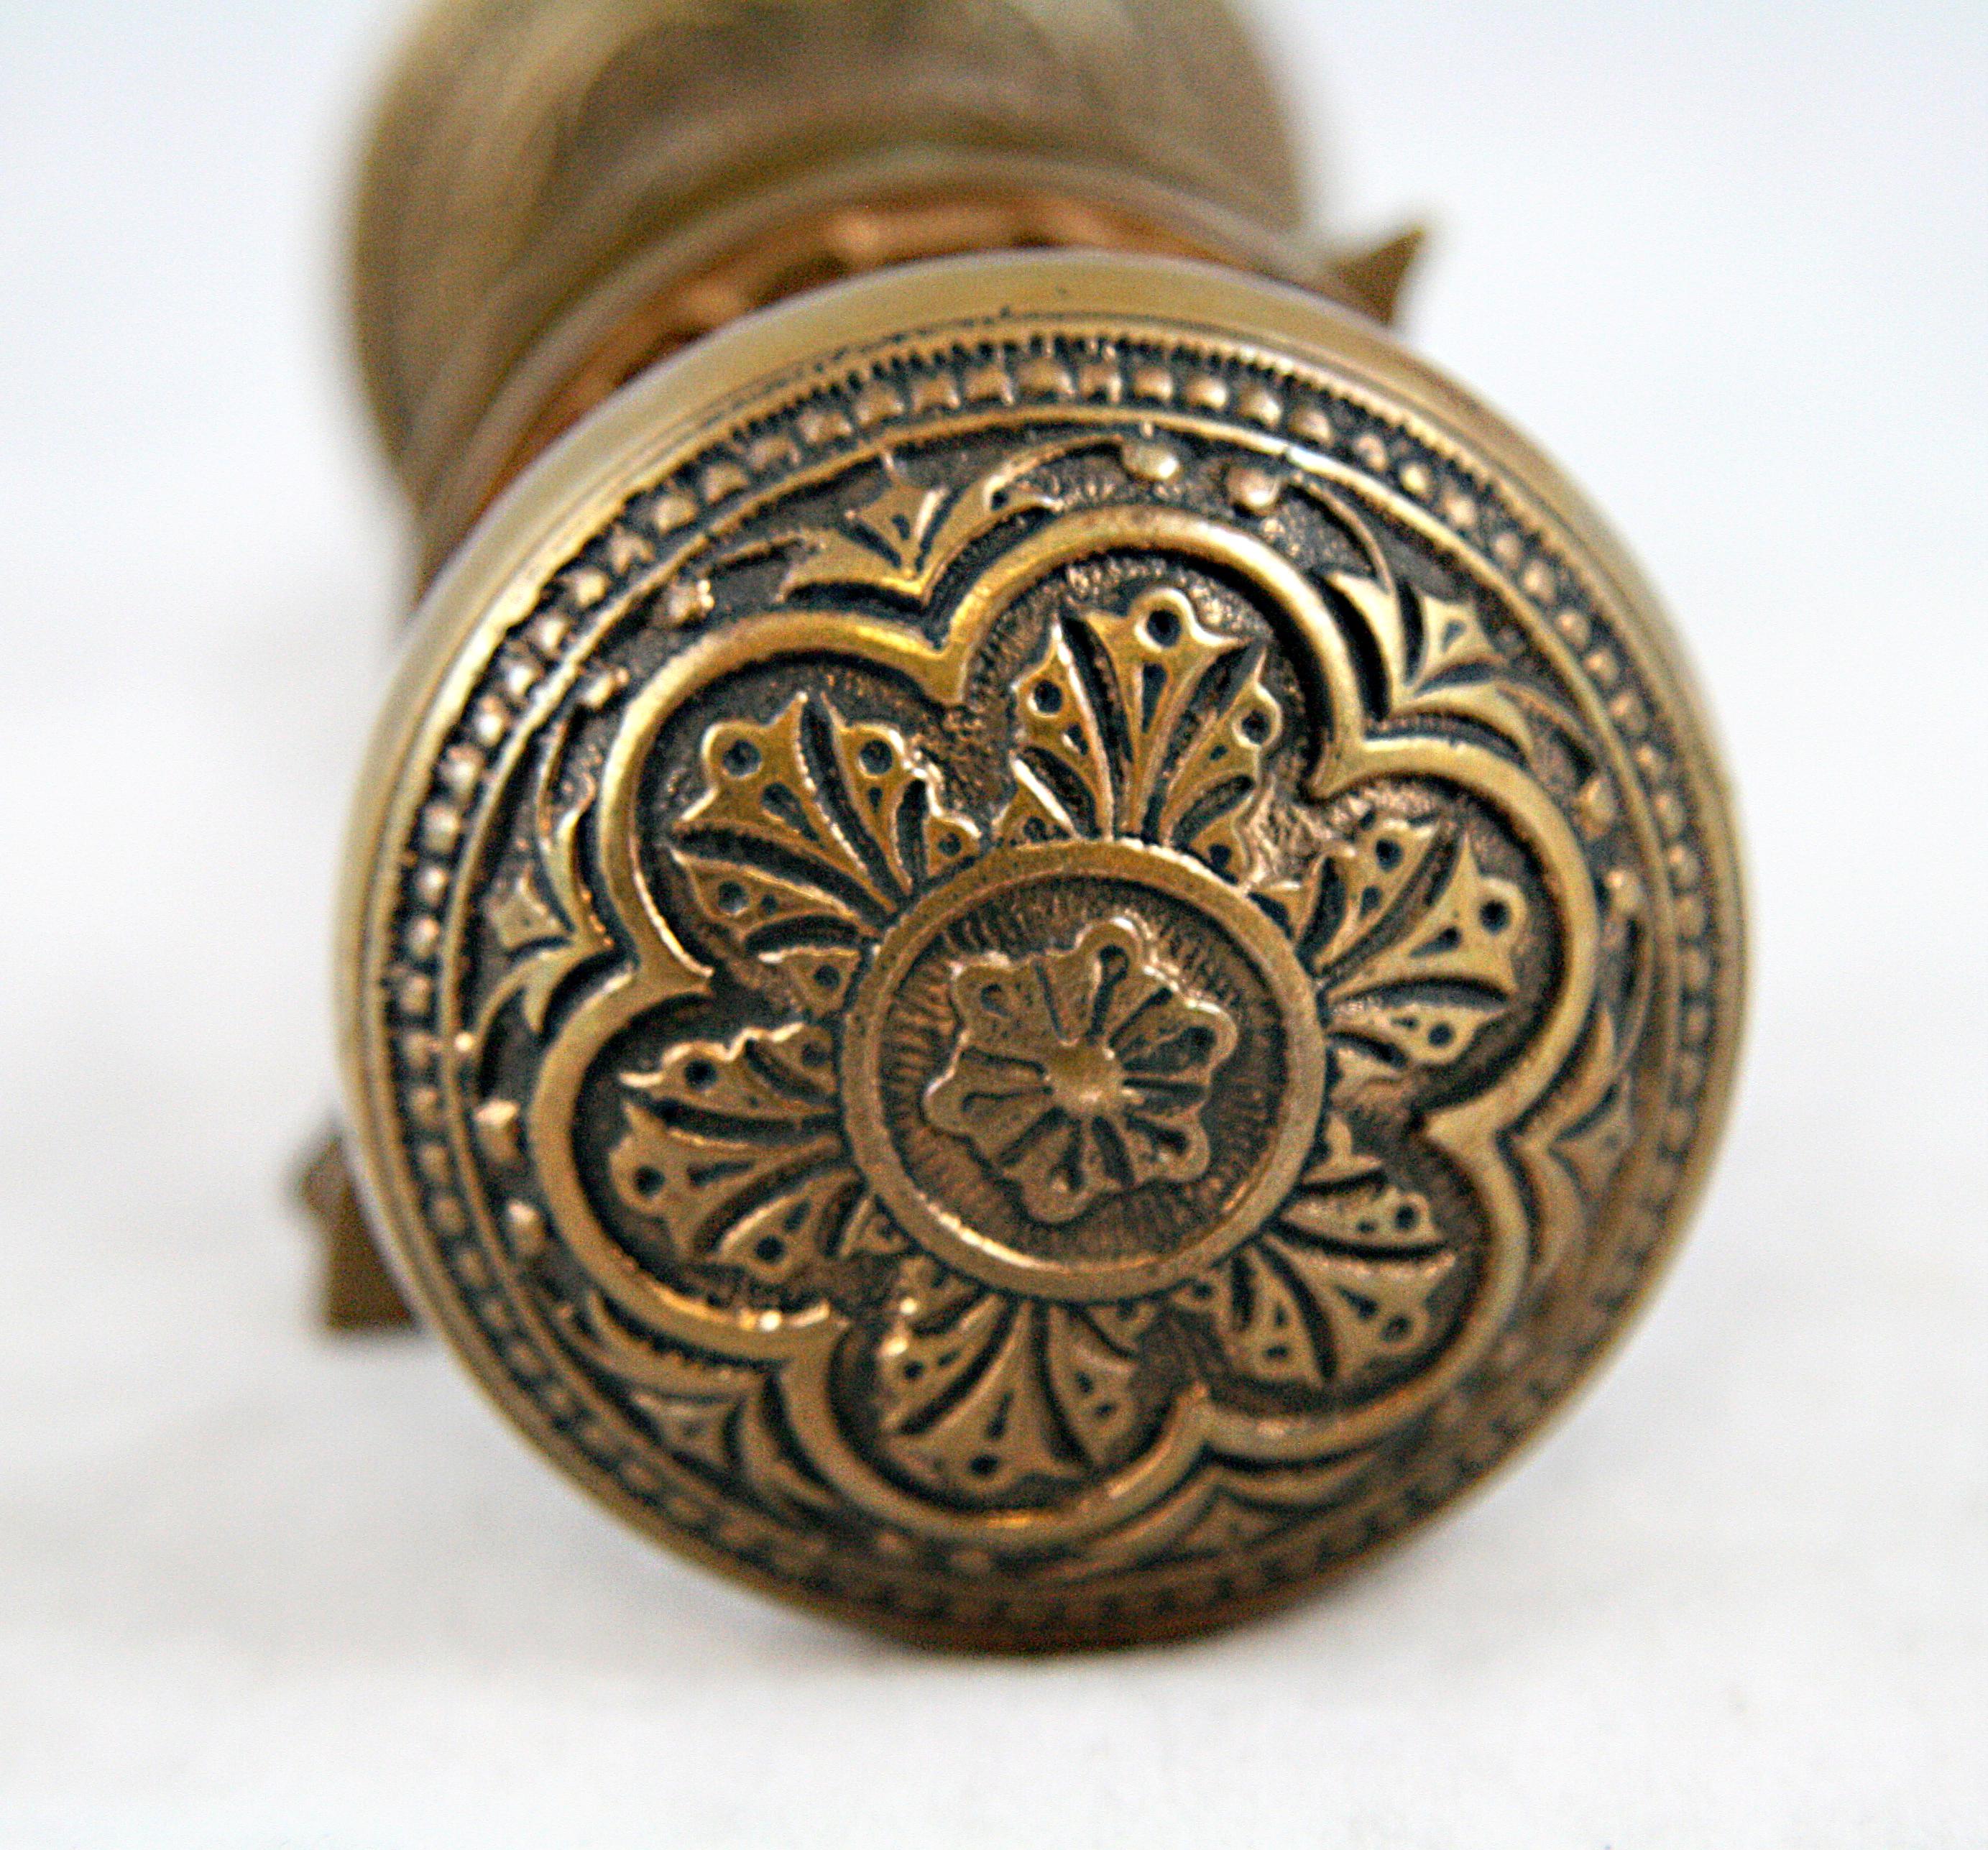 Manufactured by P.&F. Corbin Company Hardware in 1880. Part of the J-2010 style group. This set consists of two 6 fold ornate bronze door knobs, two rosettes, one keyhole escutcheon, and a spindle. Small quantity available at time of posting. Priced